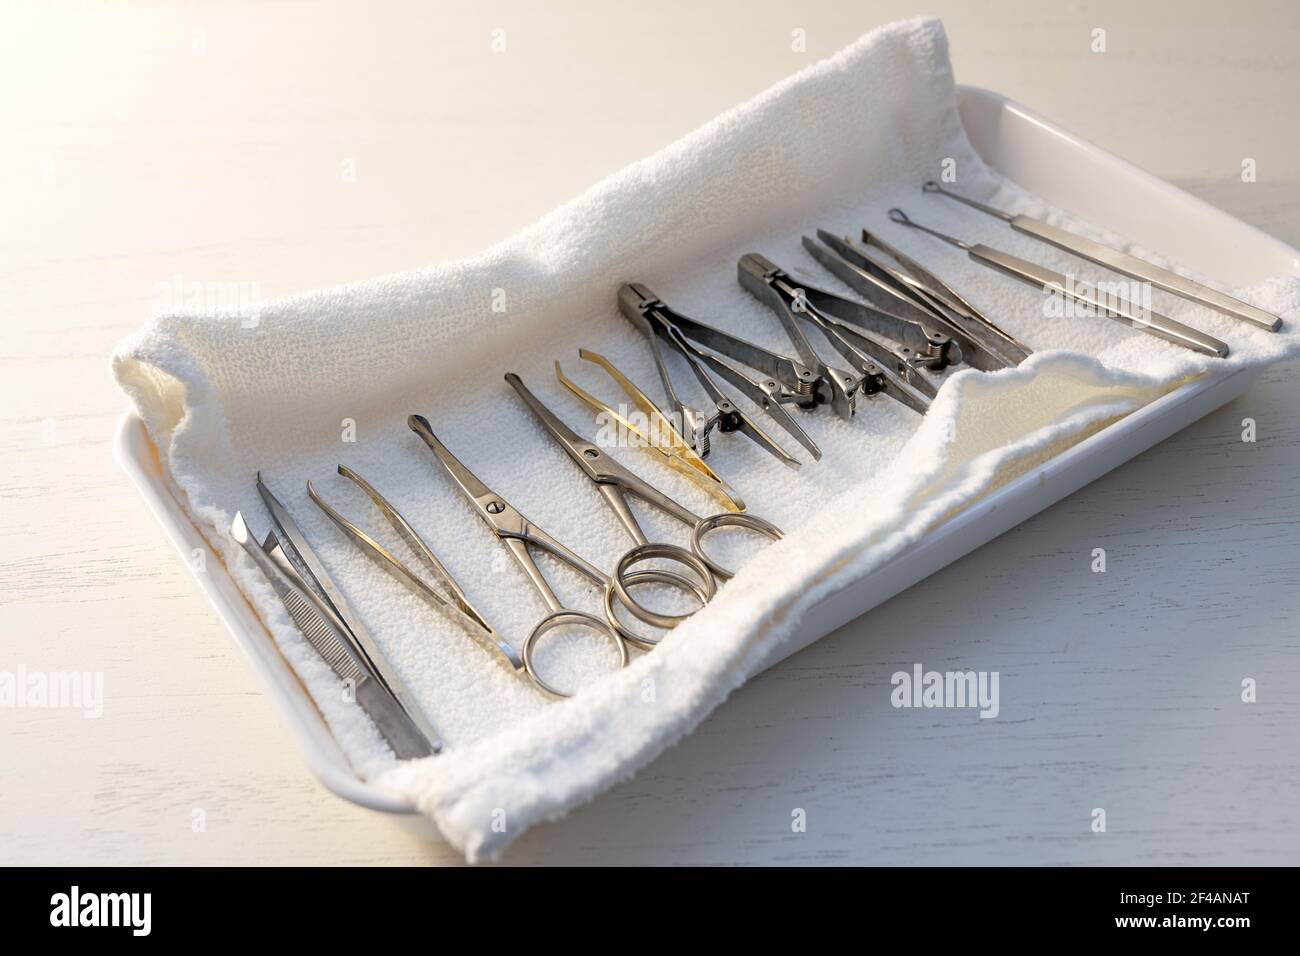 tools for manicure and pedicure like scissors, pincers and pinchers in a bowl with a white terry cloth, light background, copy space, selected focus, Stock Photo